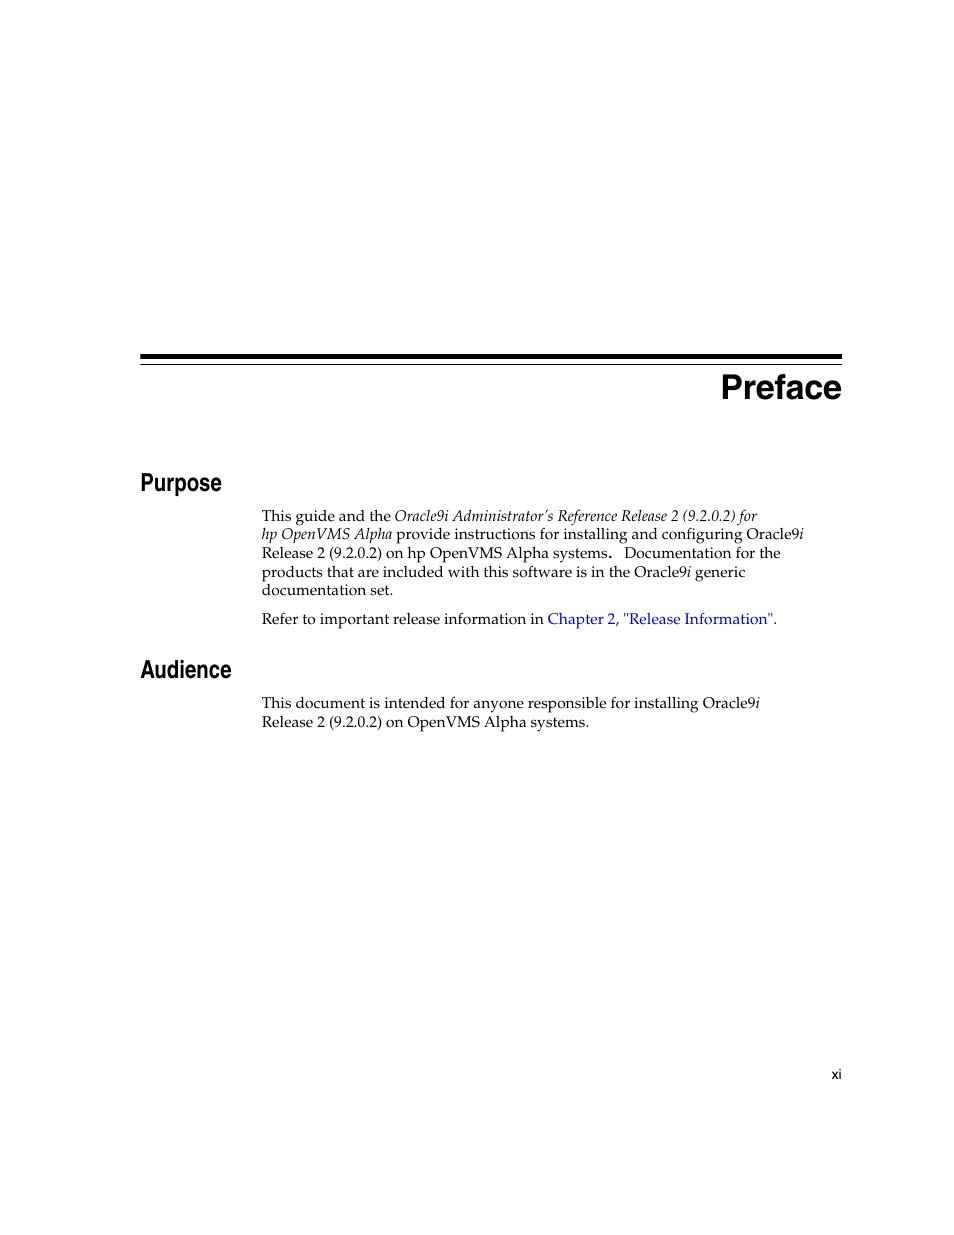 Preface, Purpose, Audience | Oracle Audio Technologies ORACLE9I B10508-01 User Manual | Page 11 / 186